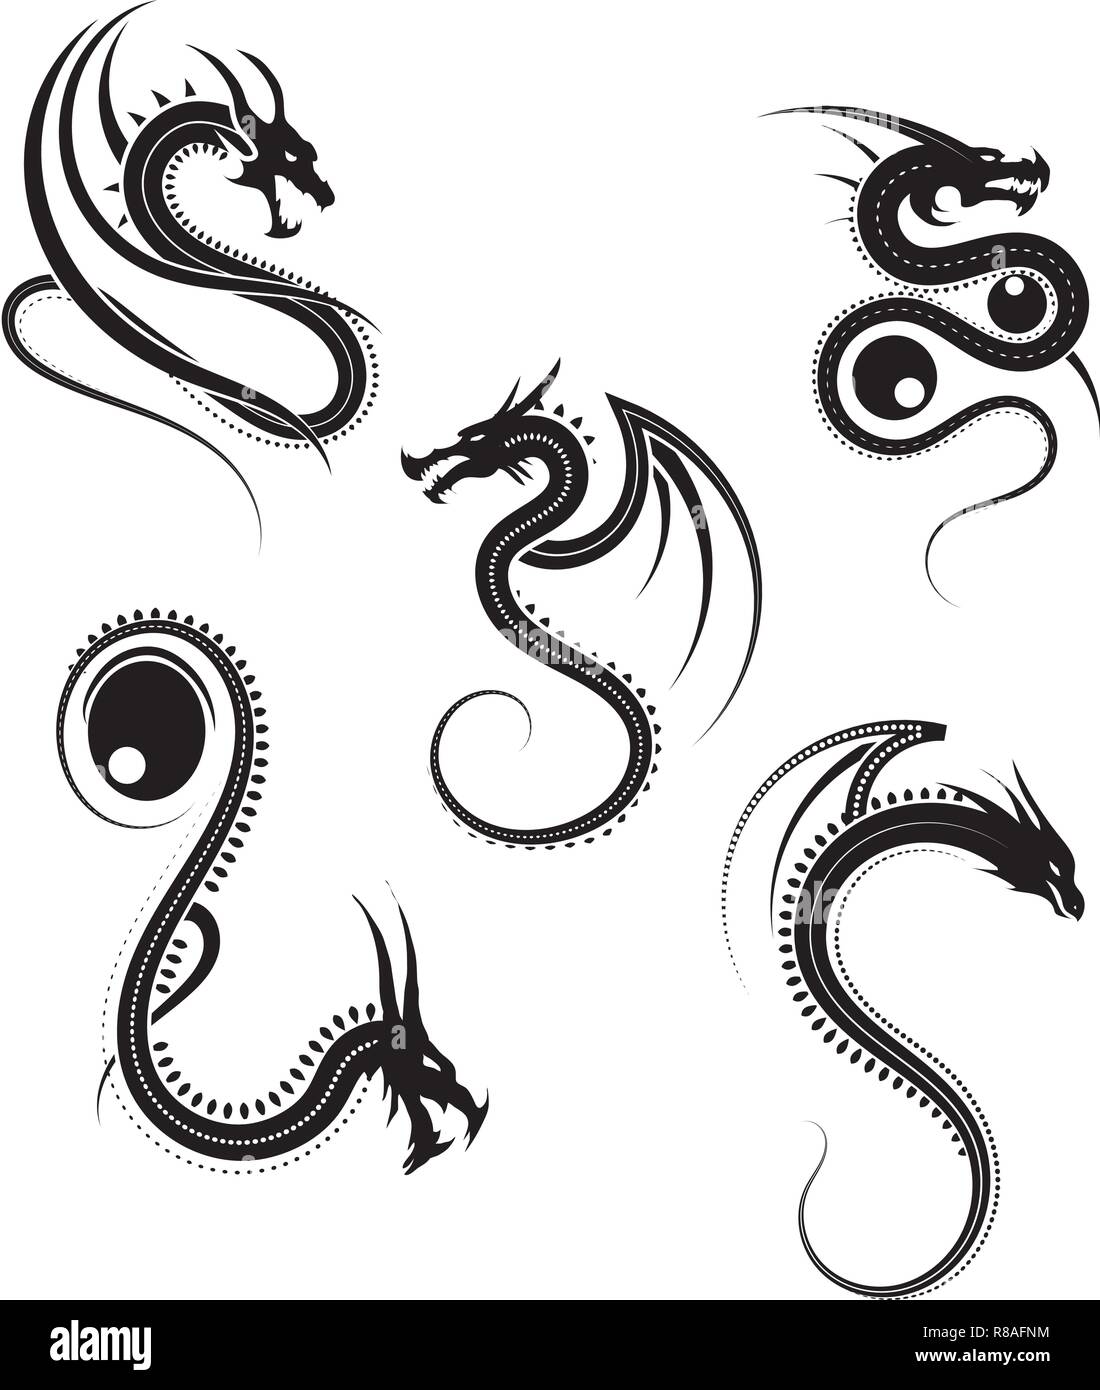 vector illustration, set of round tribal dragon designs, black and white graphics Stock Vector